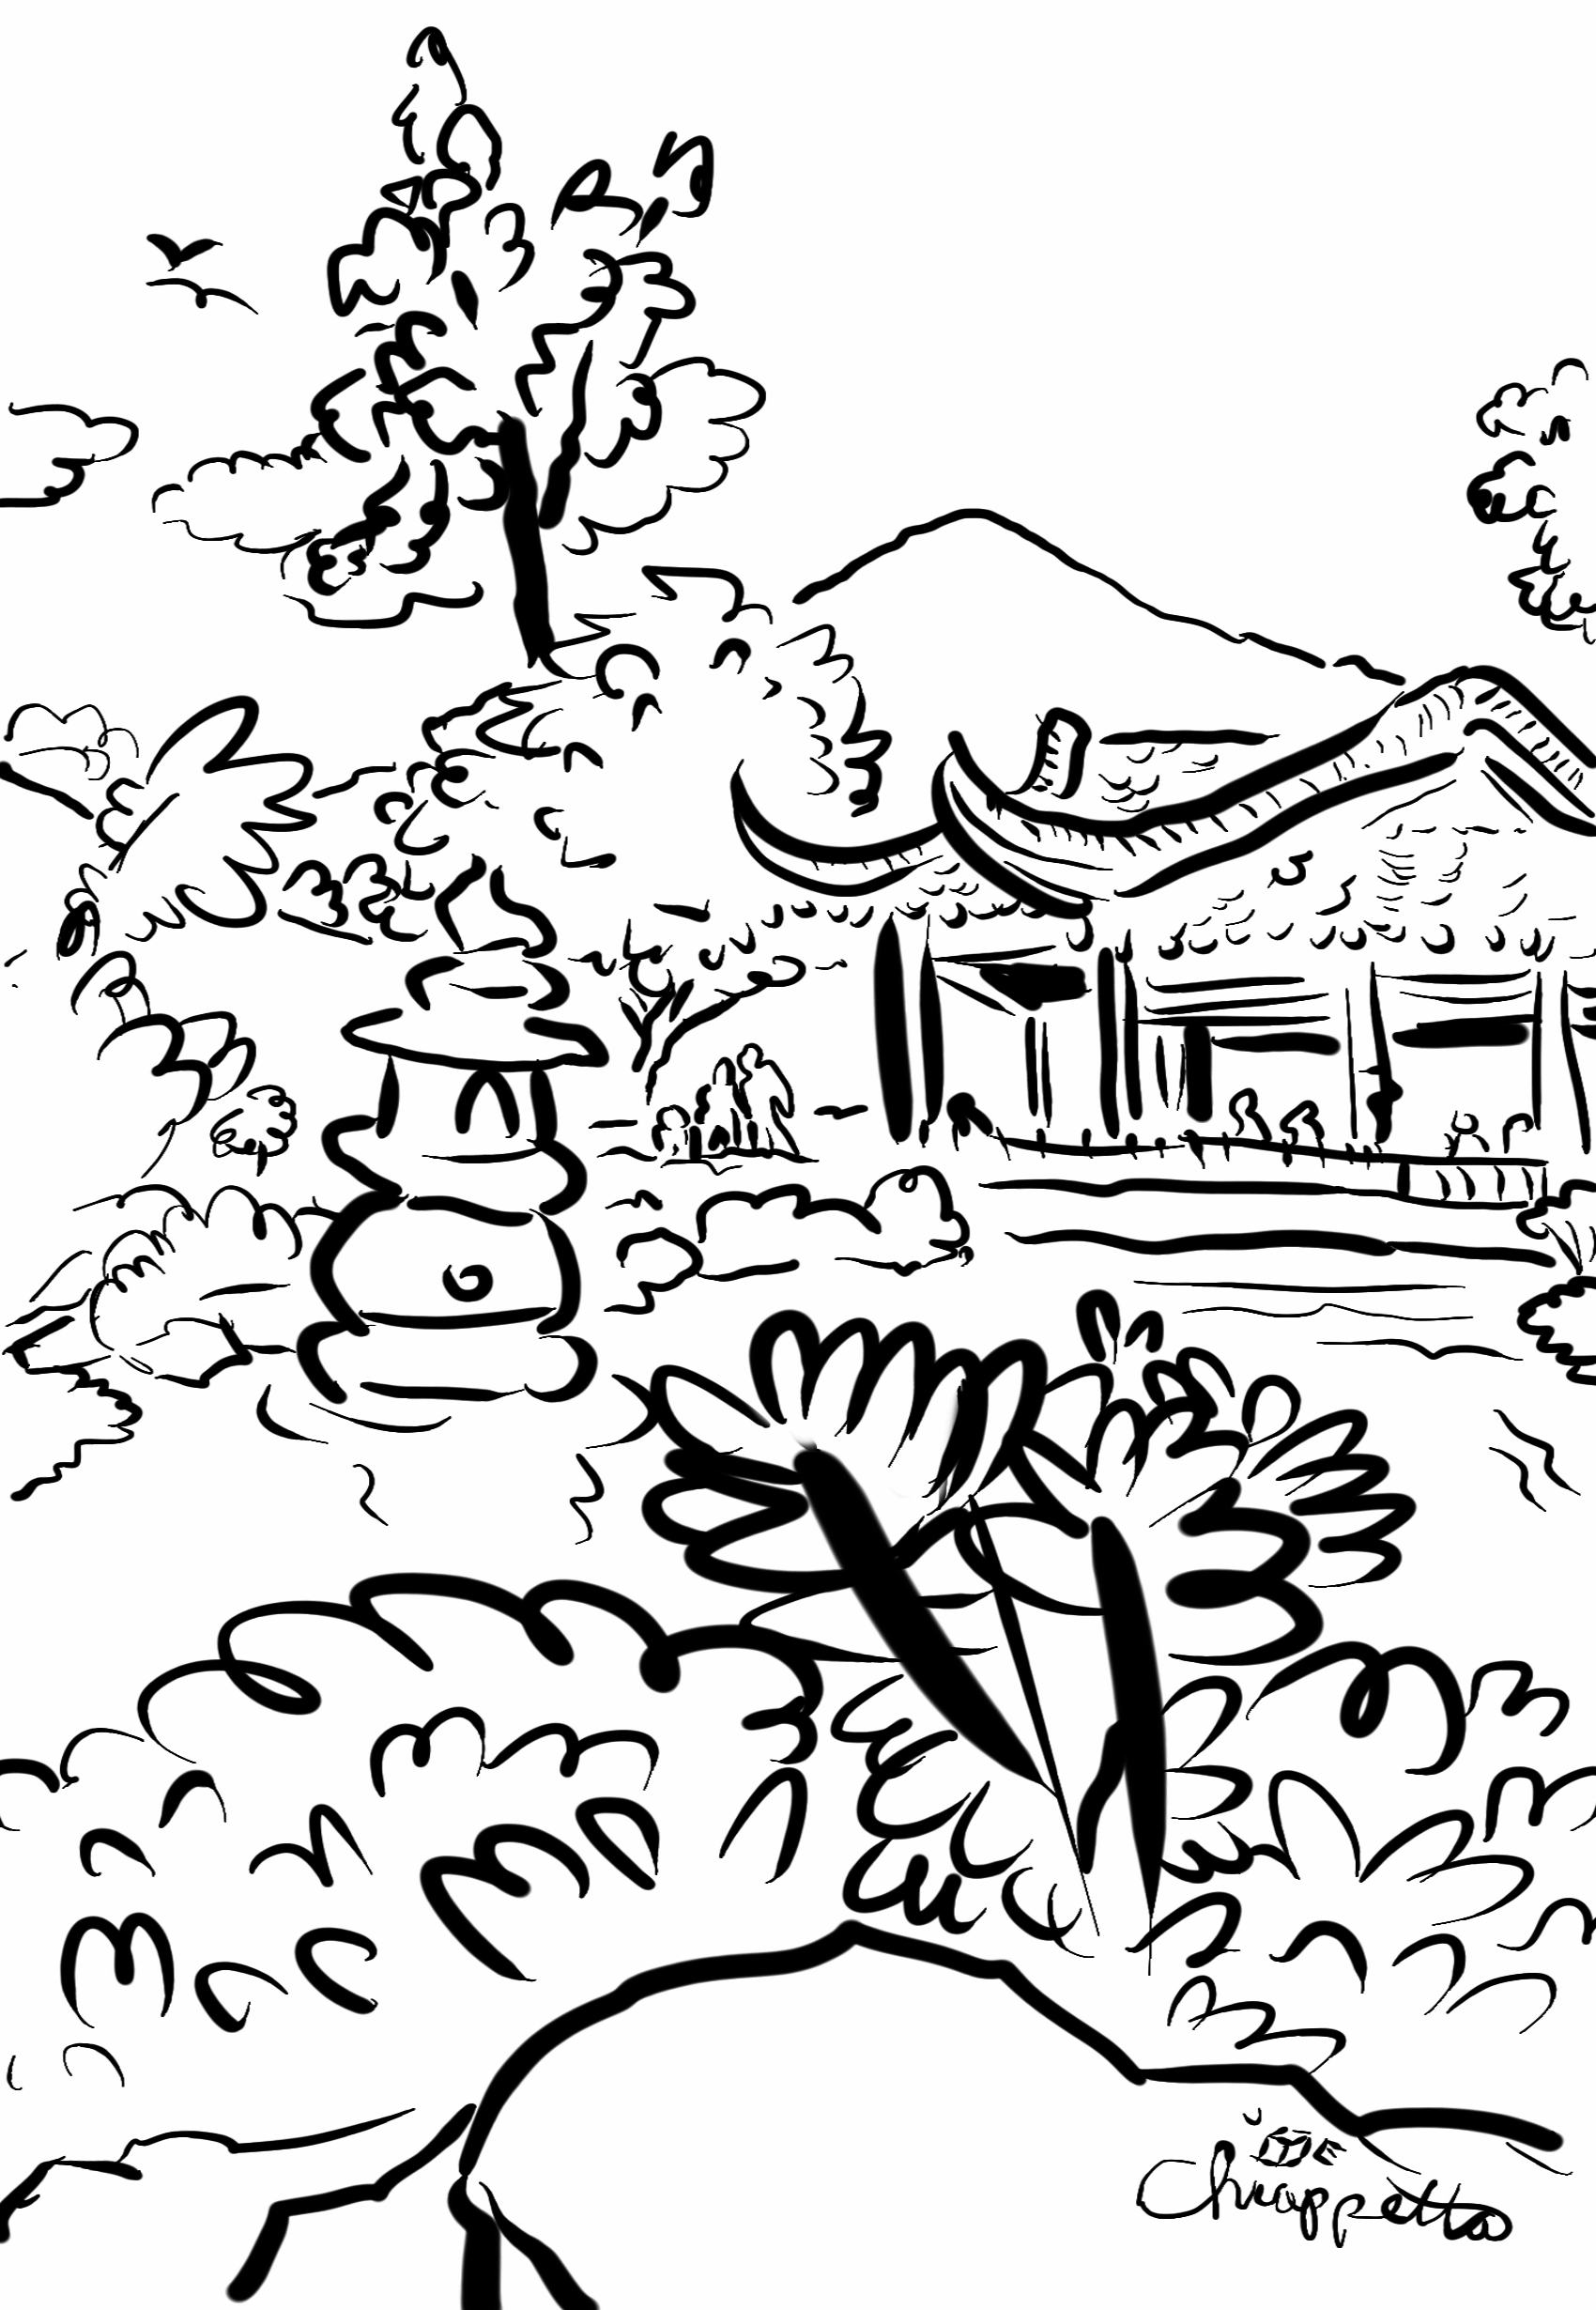 Chinese Garden Rubber Cling Stamp